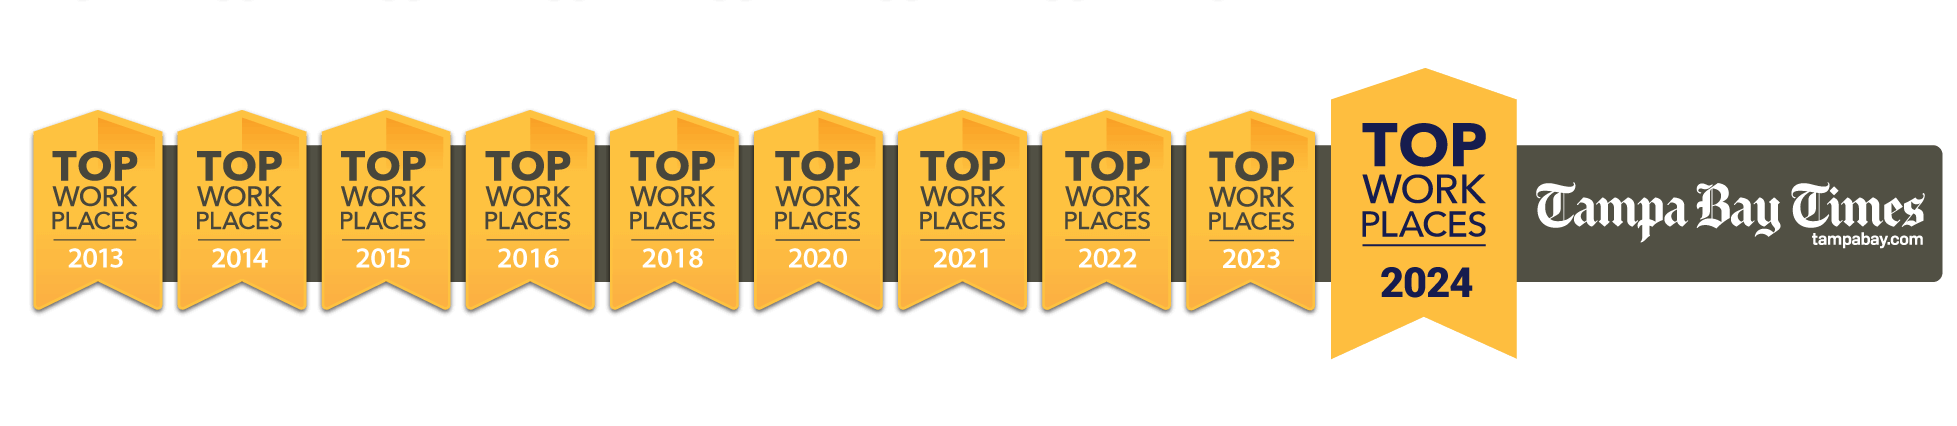 Top Workplace 2024 Careers Page Banner